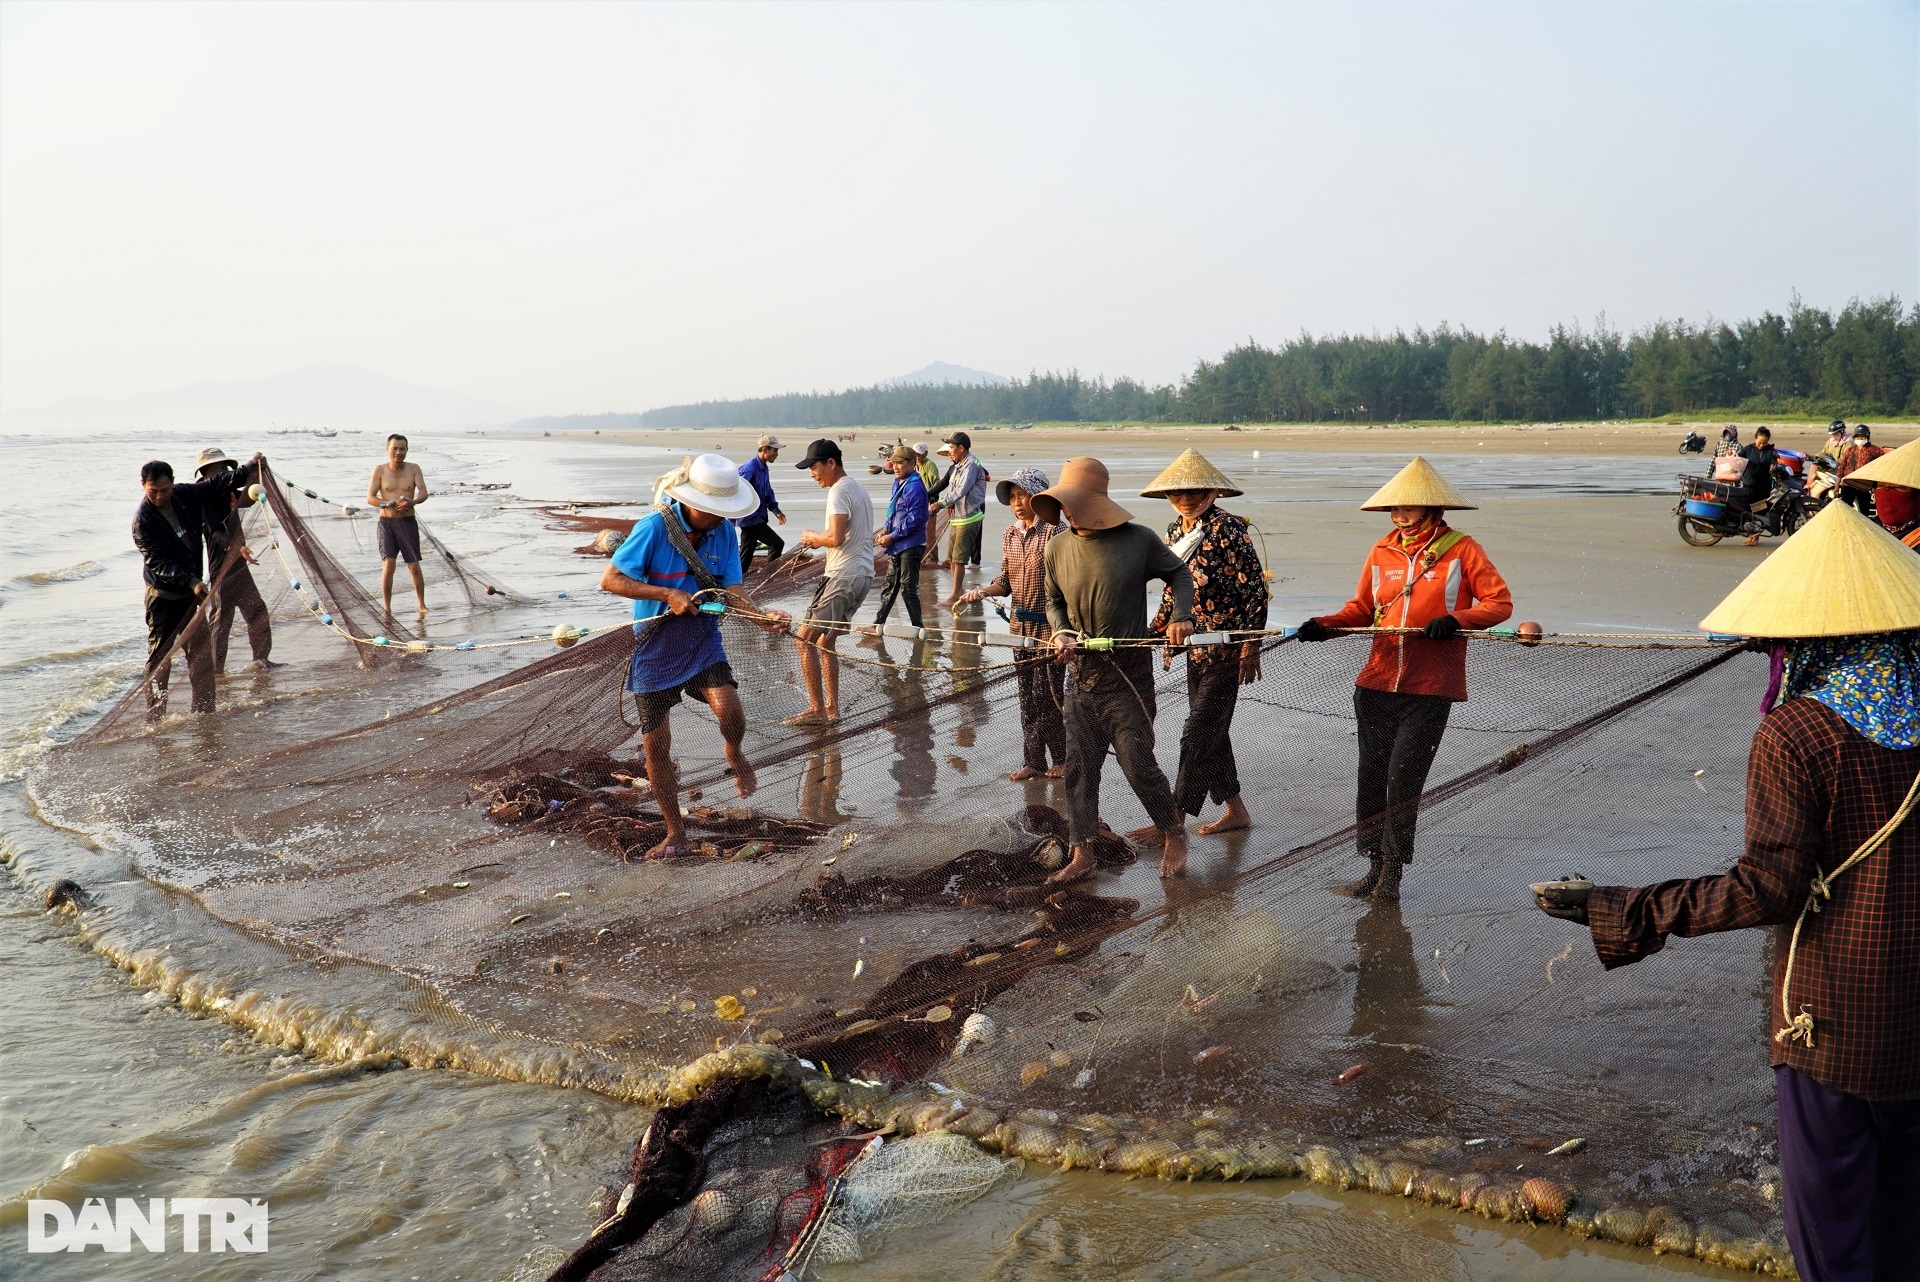 The group of people exercising on the beach also brought back dozens of kilograms of fresh squid - 10